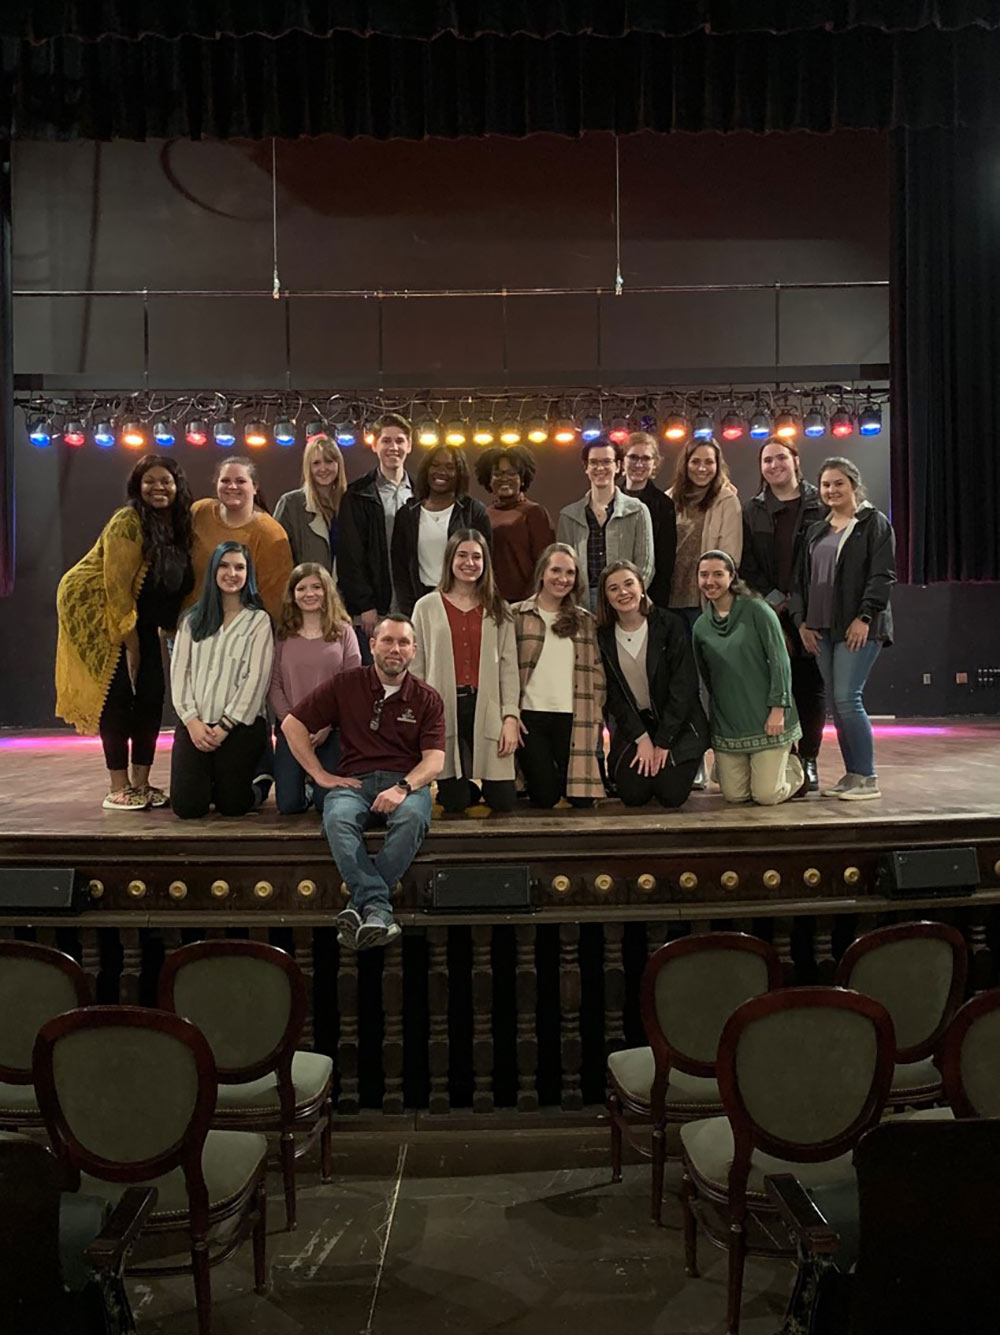 a group of students in the lighting class on stage with a row of colorful lights behind them